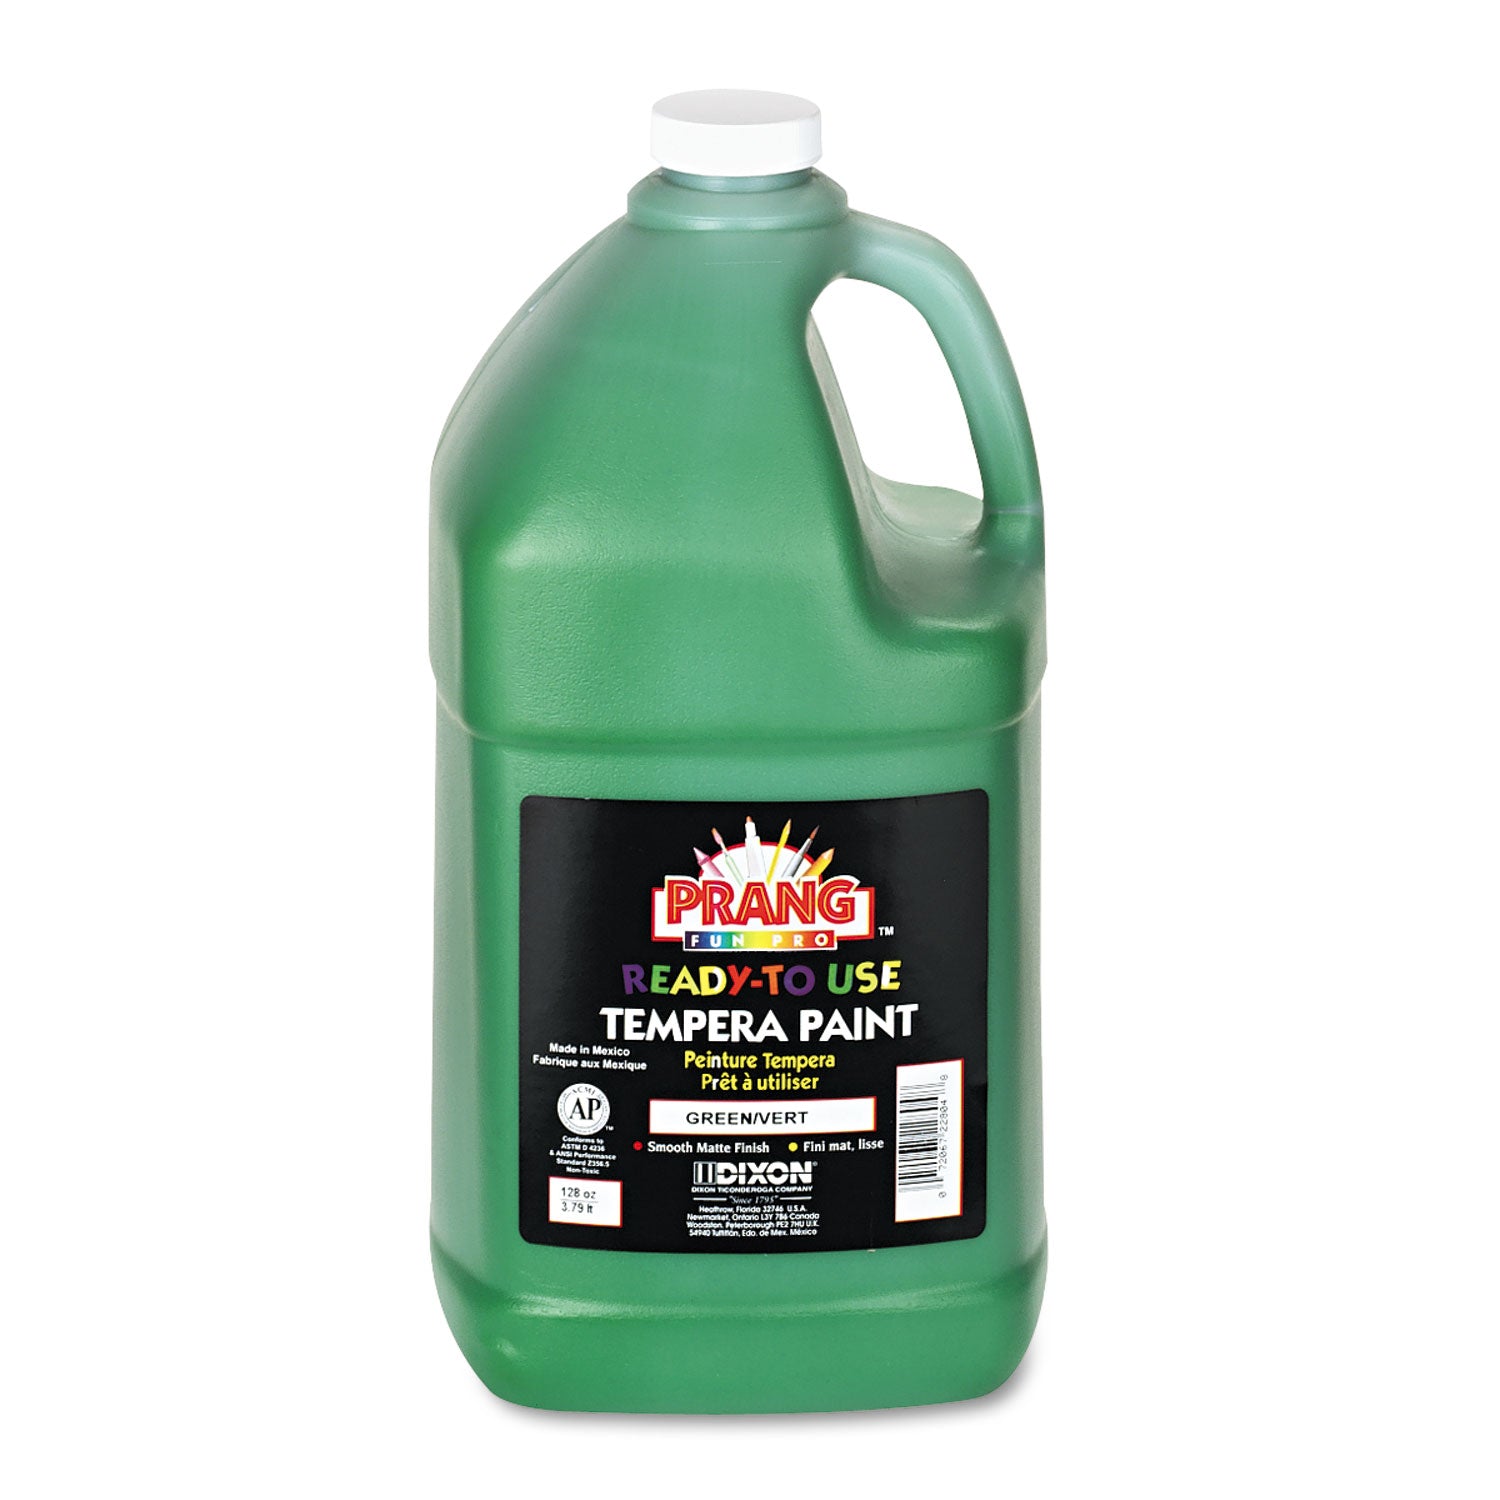 Ready-to-Use Tempera Paint, Green, 1 gal Bottle - 